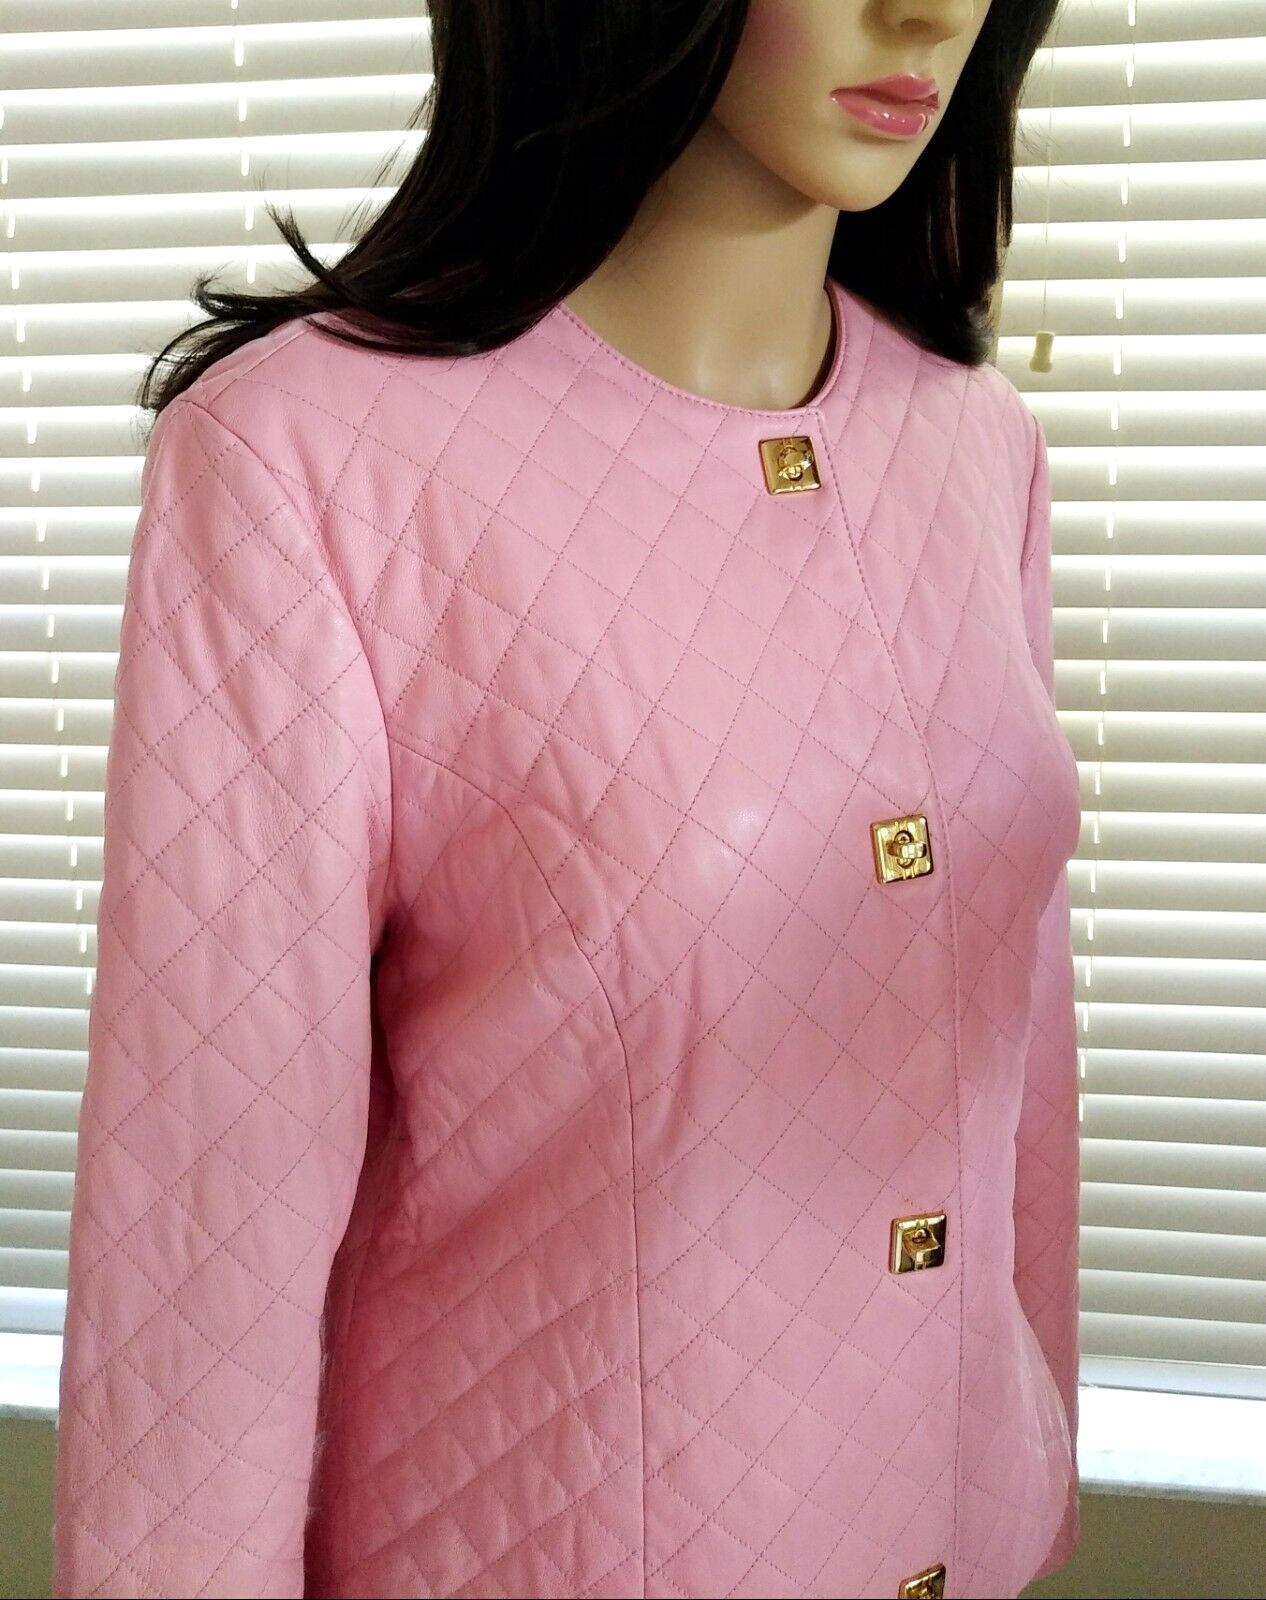  Gianfranco Ferre Petal Pink Quilted Lambskin Leather Jacket EU 38/ US 4 6 For Sale 2